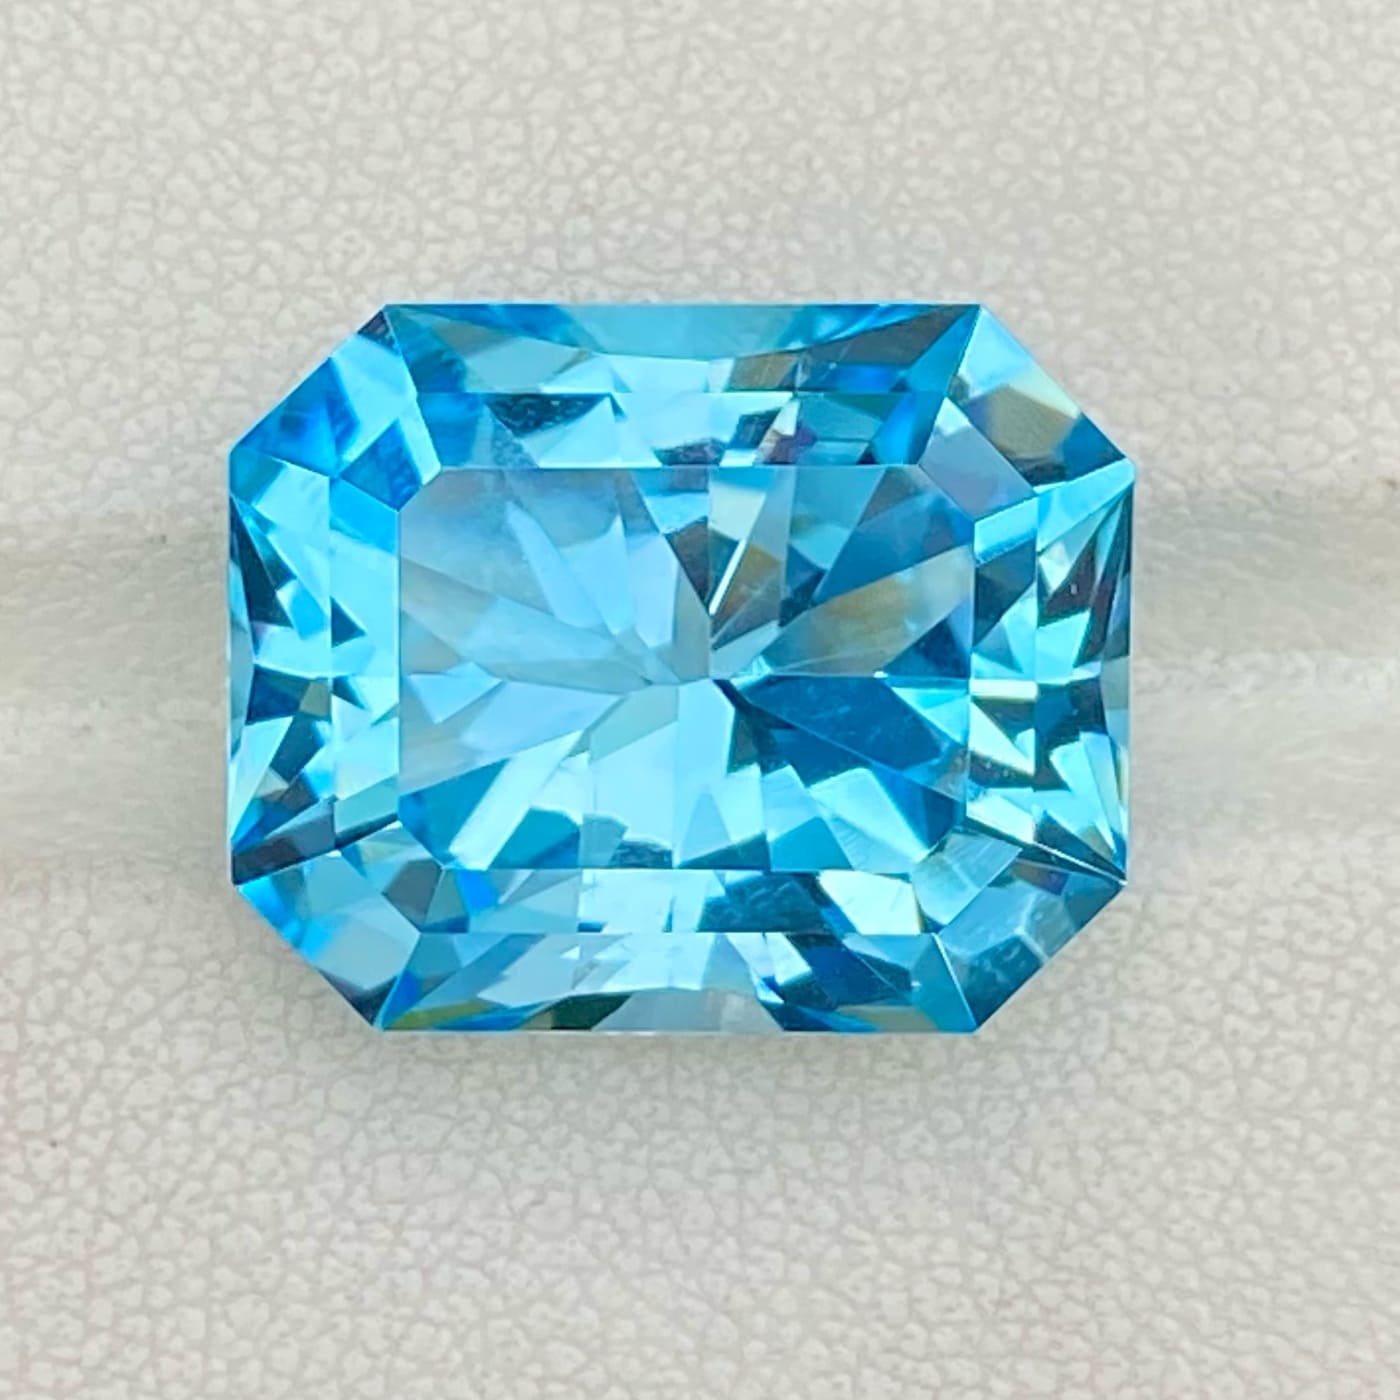 Buy 21.20 Carats Faceted Swiss Blue Topaz Gemstone